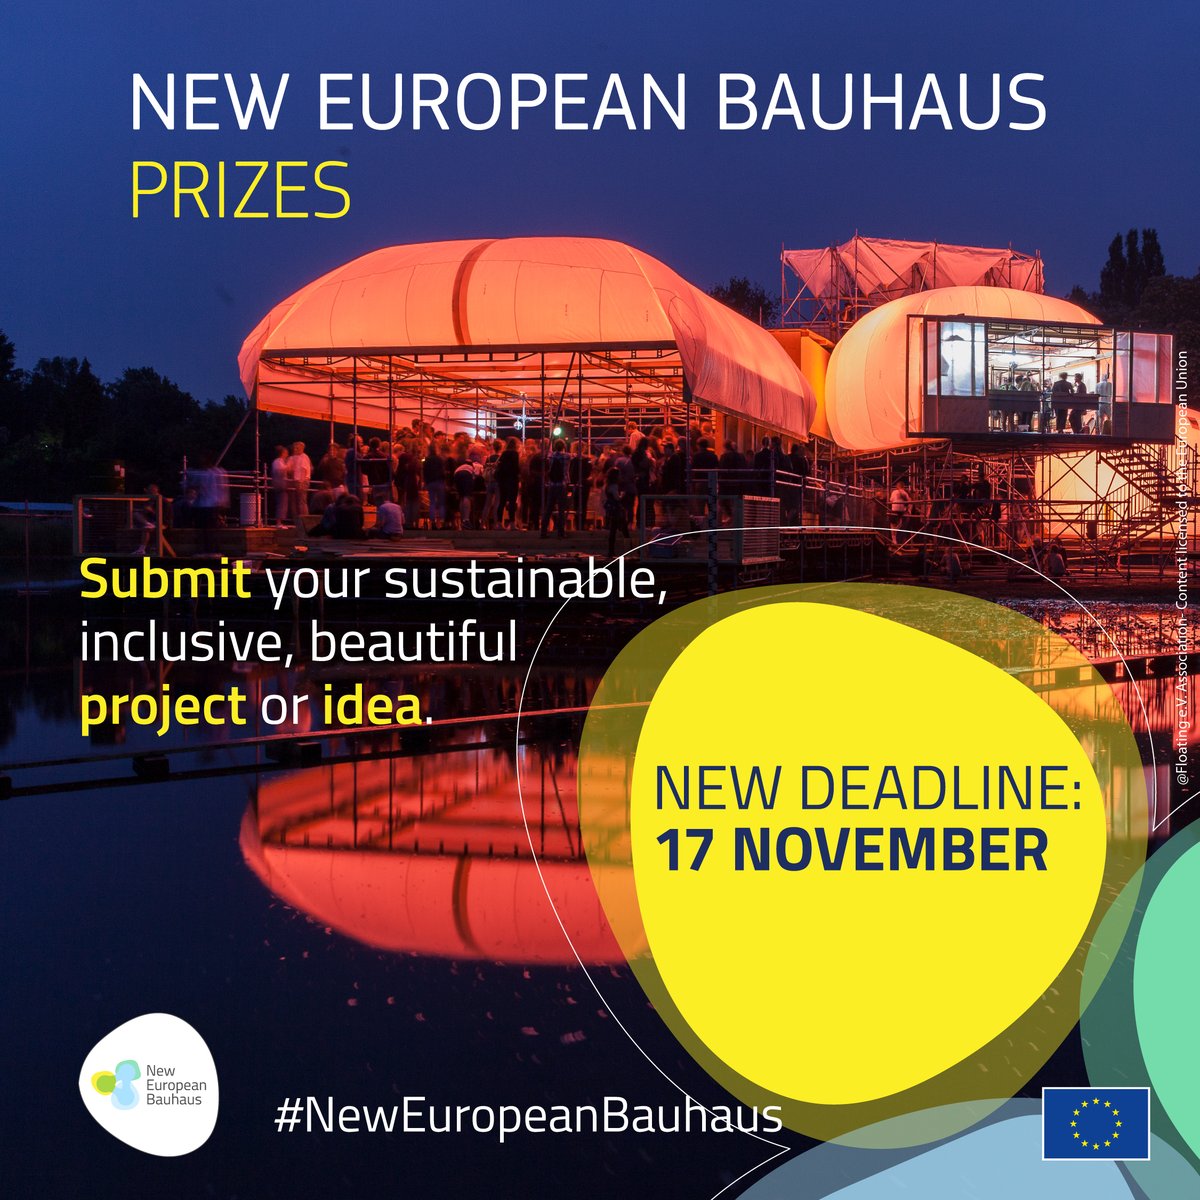 #HubPicks 💡 The application deadline for the #NewEuropeanBauhaus Prizes 2024 has been extended to 17 Nov. Across 4 categories, the awards recognise projects embracing beauty, sustainability & inclusiveness, in line with the #NEB principles 🇪🇺 🏆 Apply 👉prizes.new-european-bauhaus.europa.eu/submit-your-ap…